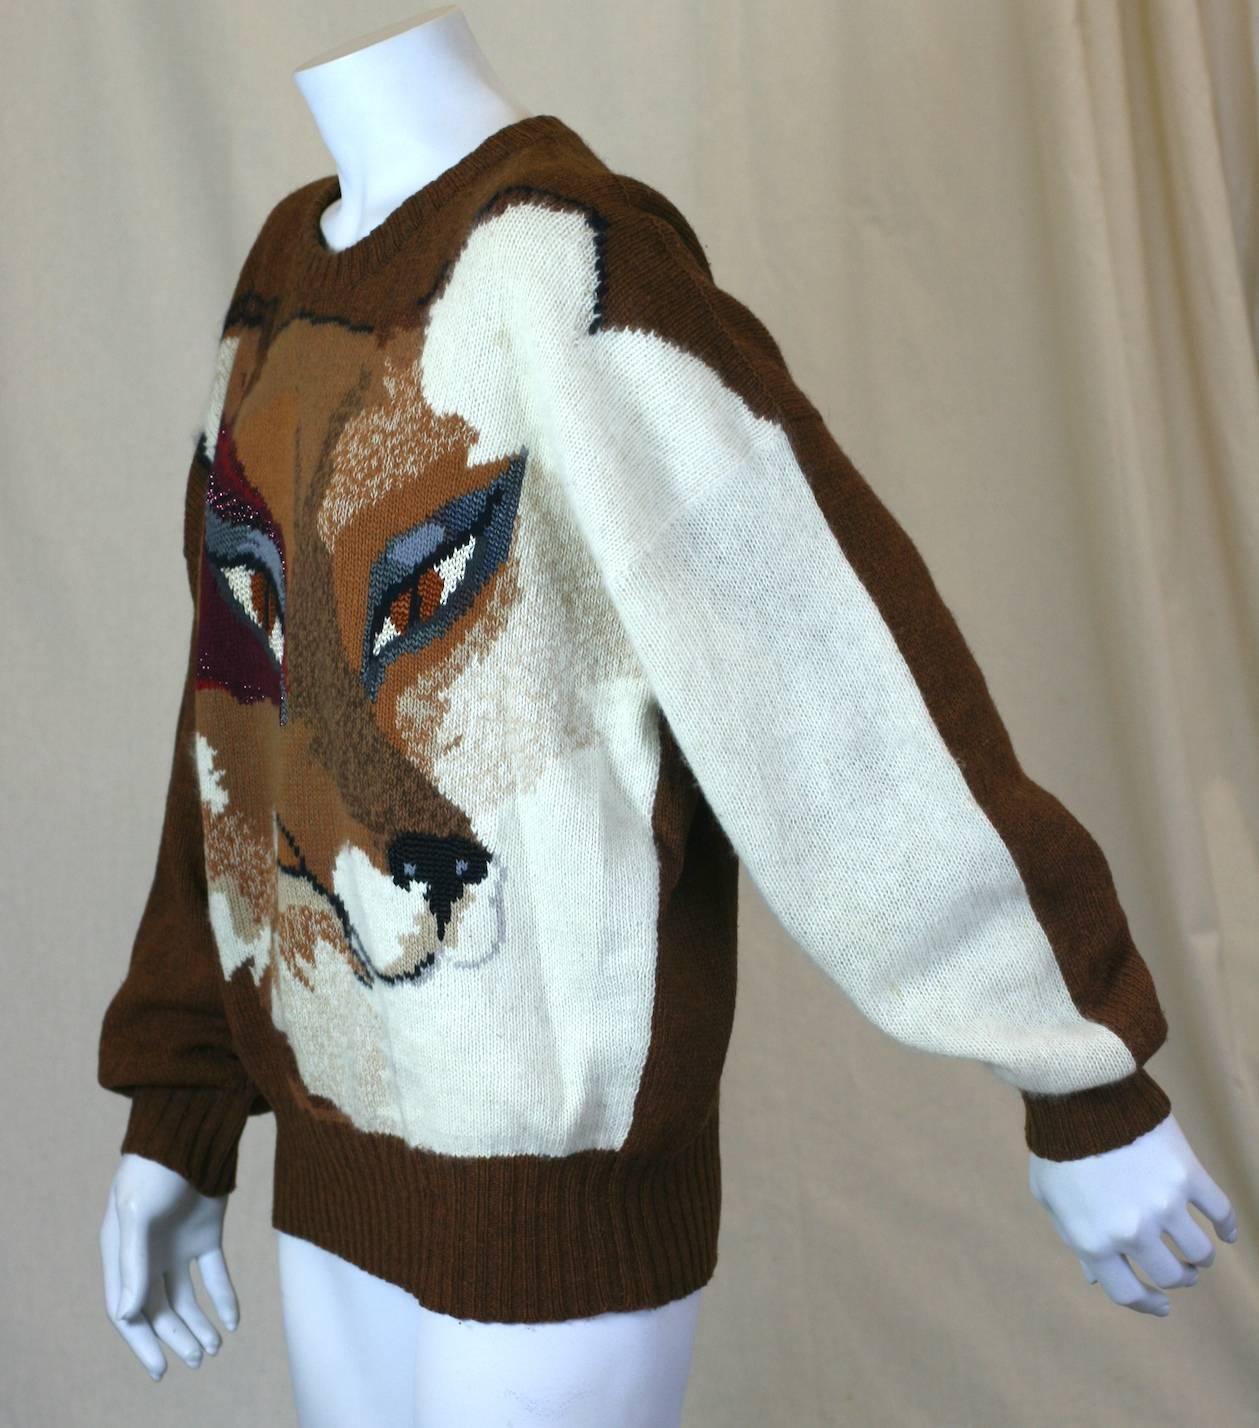 Krizia Wily Fox Sweater from their collectible animal series. Mariuccia Mandelli of Krizia always kept the fashion flock guessing in the 1980's with her thematic, unpredictable figural sweaters. Always charming, beautifully crafted and now,